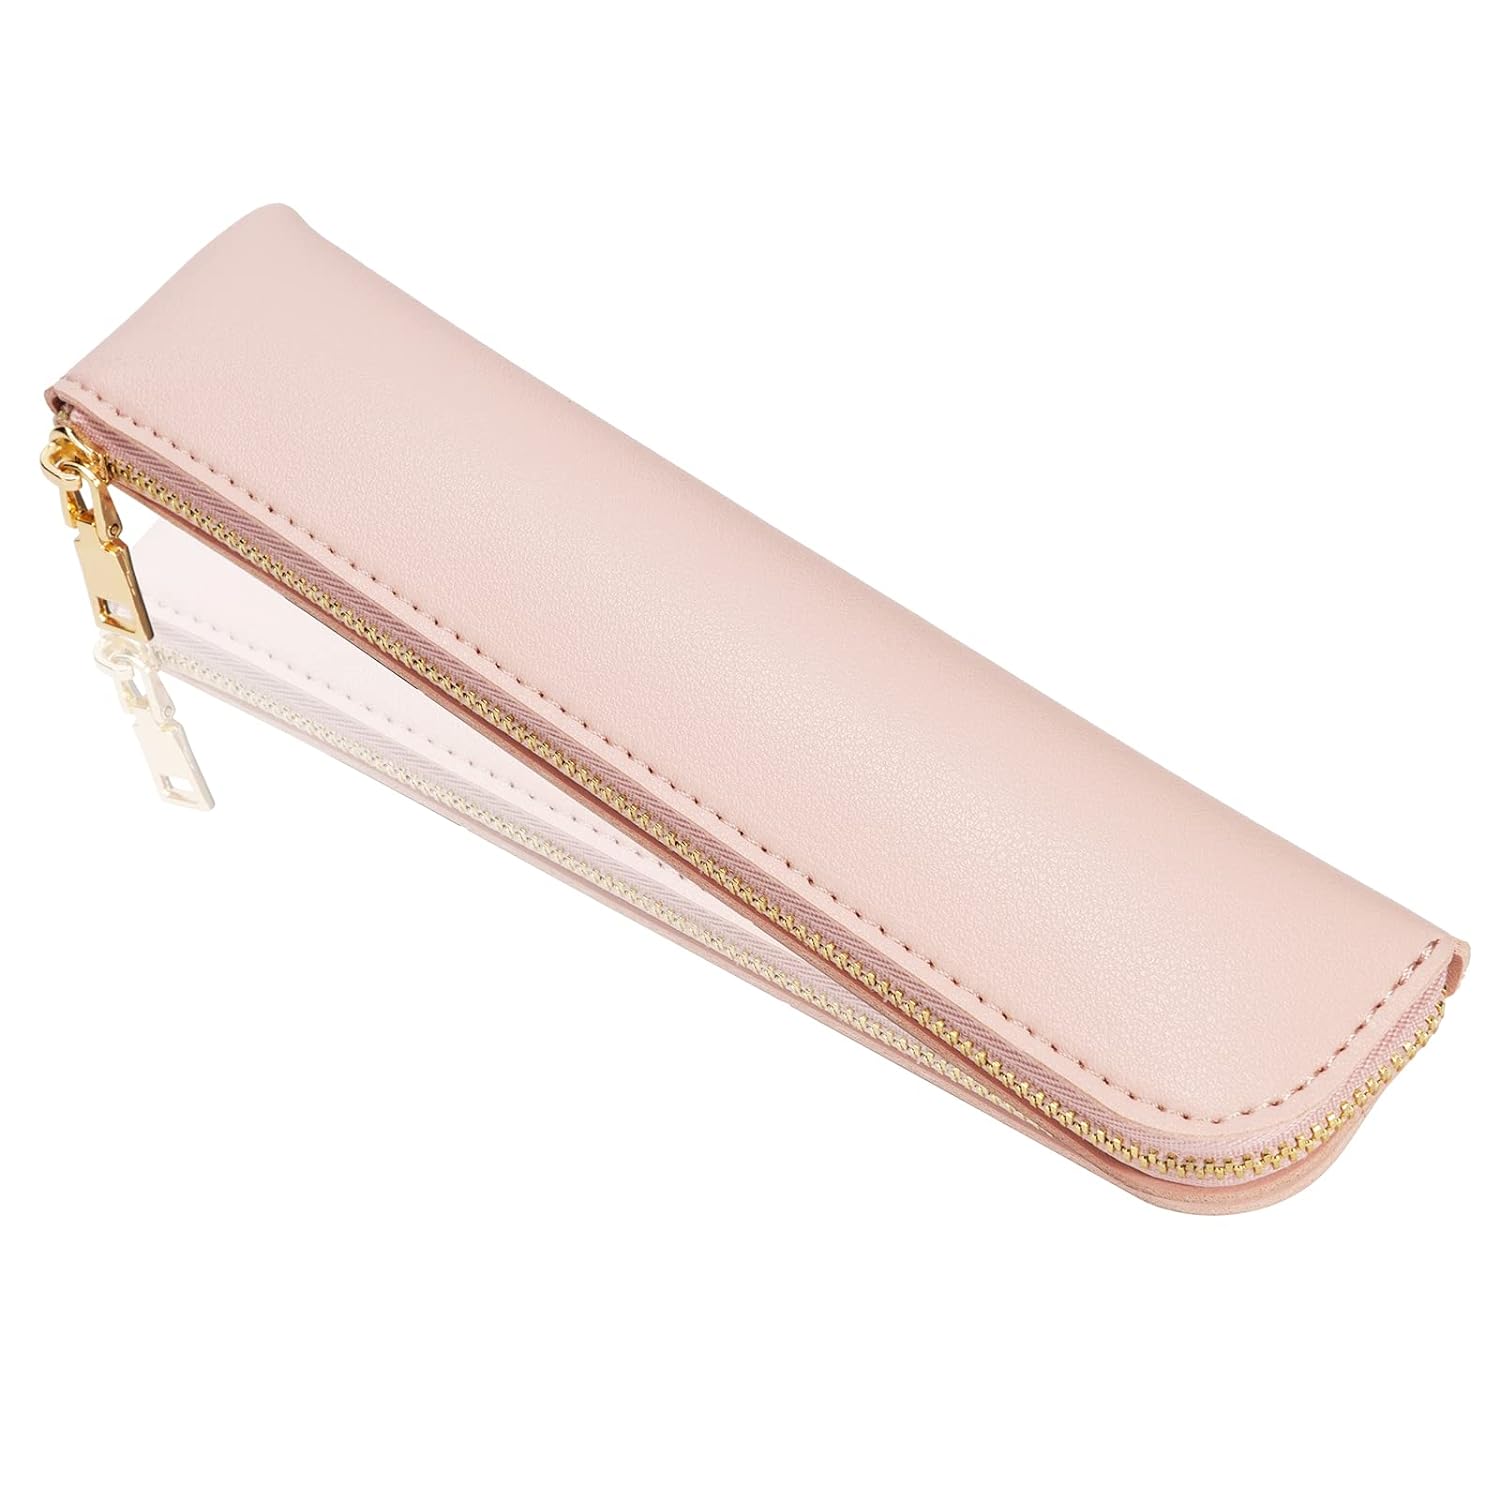 Great Choice Products Pink Slim Pencil Case, Small Leather Pouch, Leather Pencil Pouch, Leather Pencil Holder For Women.…